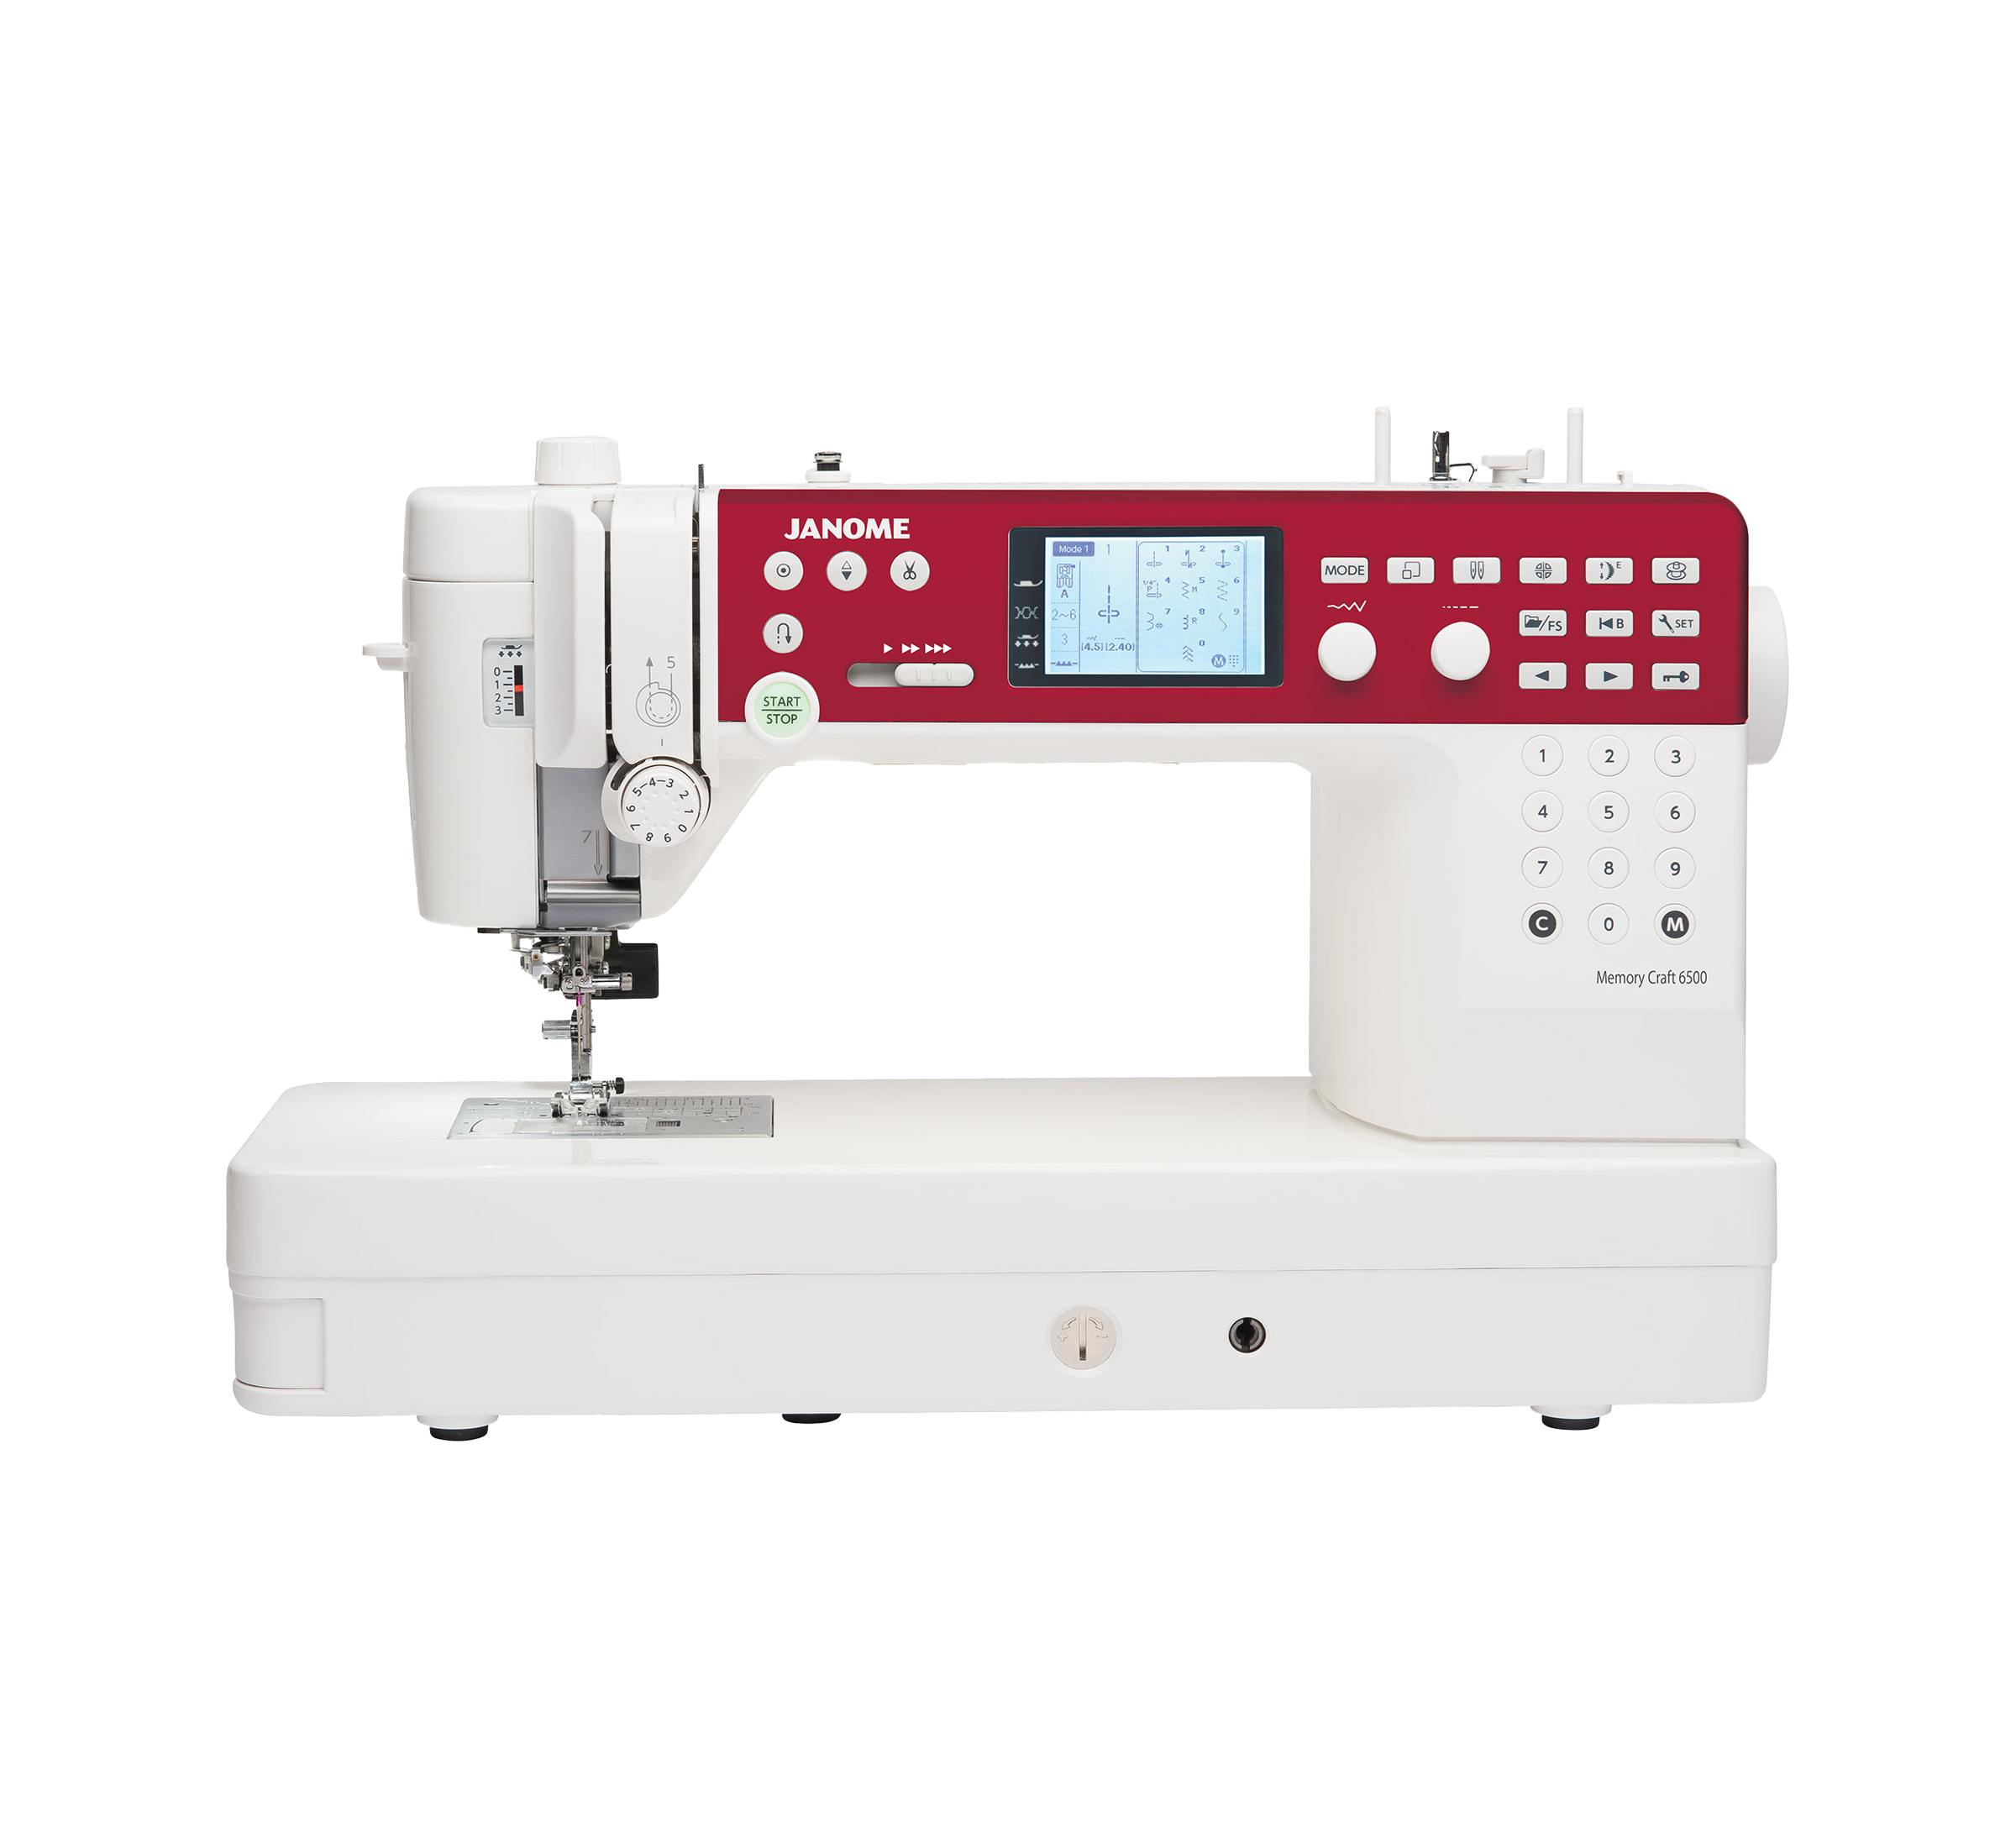 Shop the largest selection of genuine Janome accessories for your new Janome Memory Craft 6650 Sewing and Embroidery Machine at World Weidner!